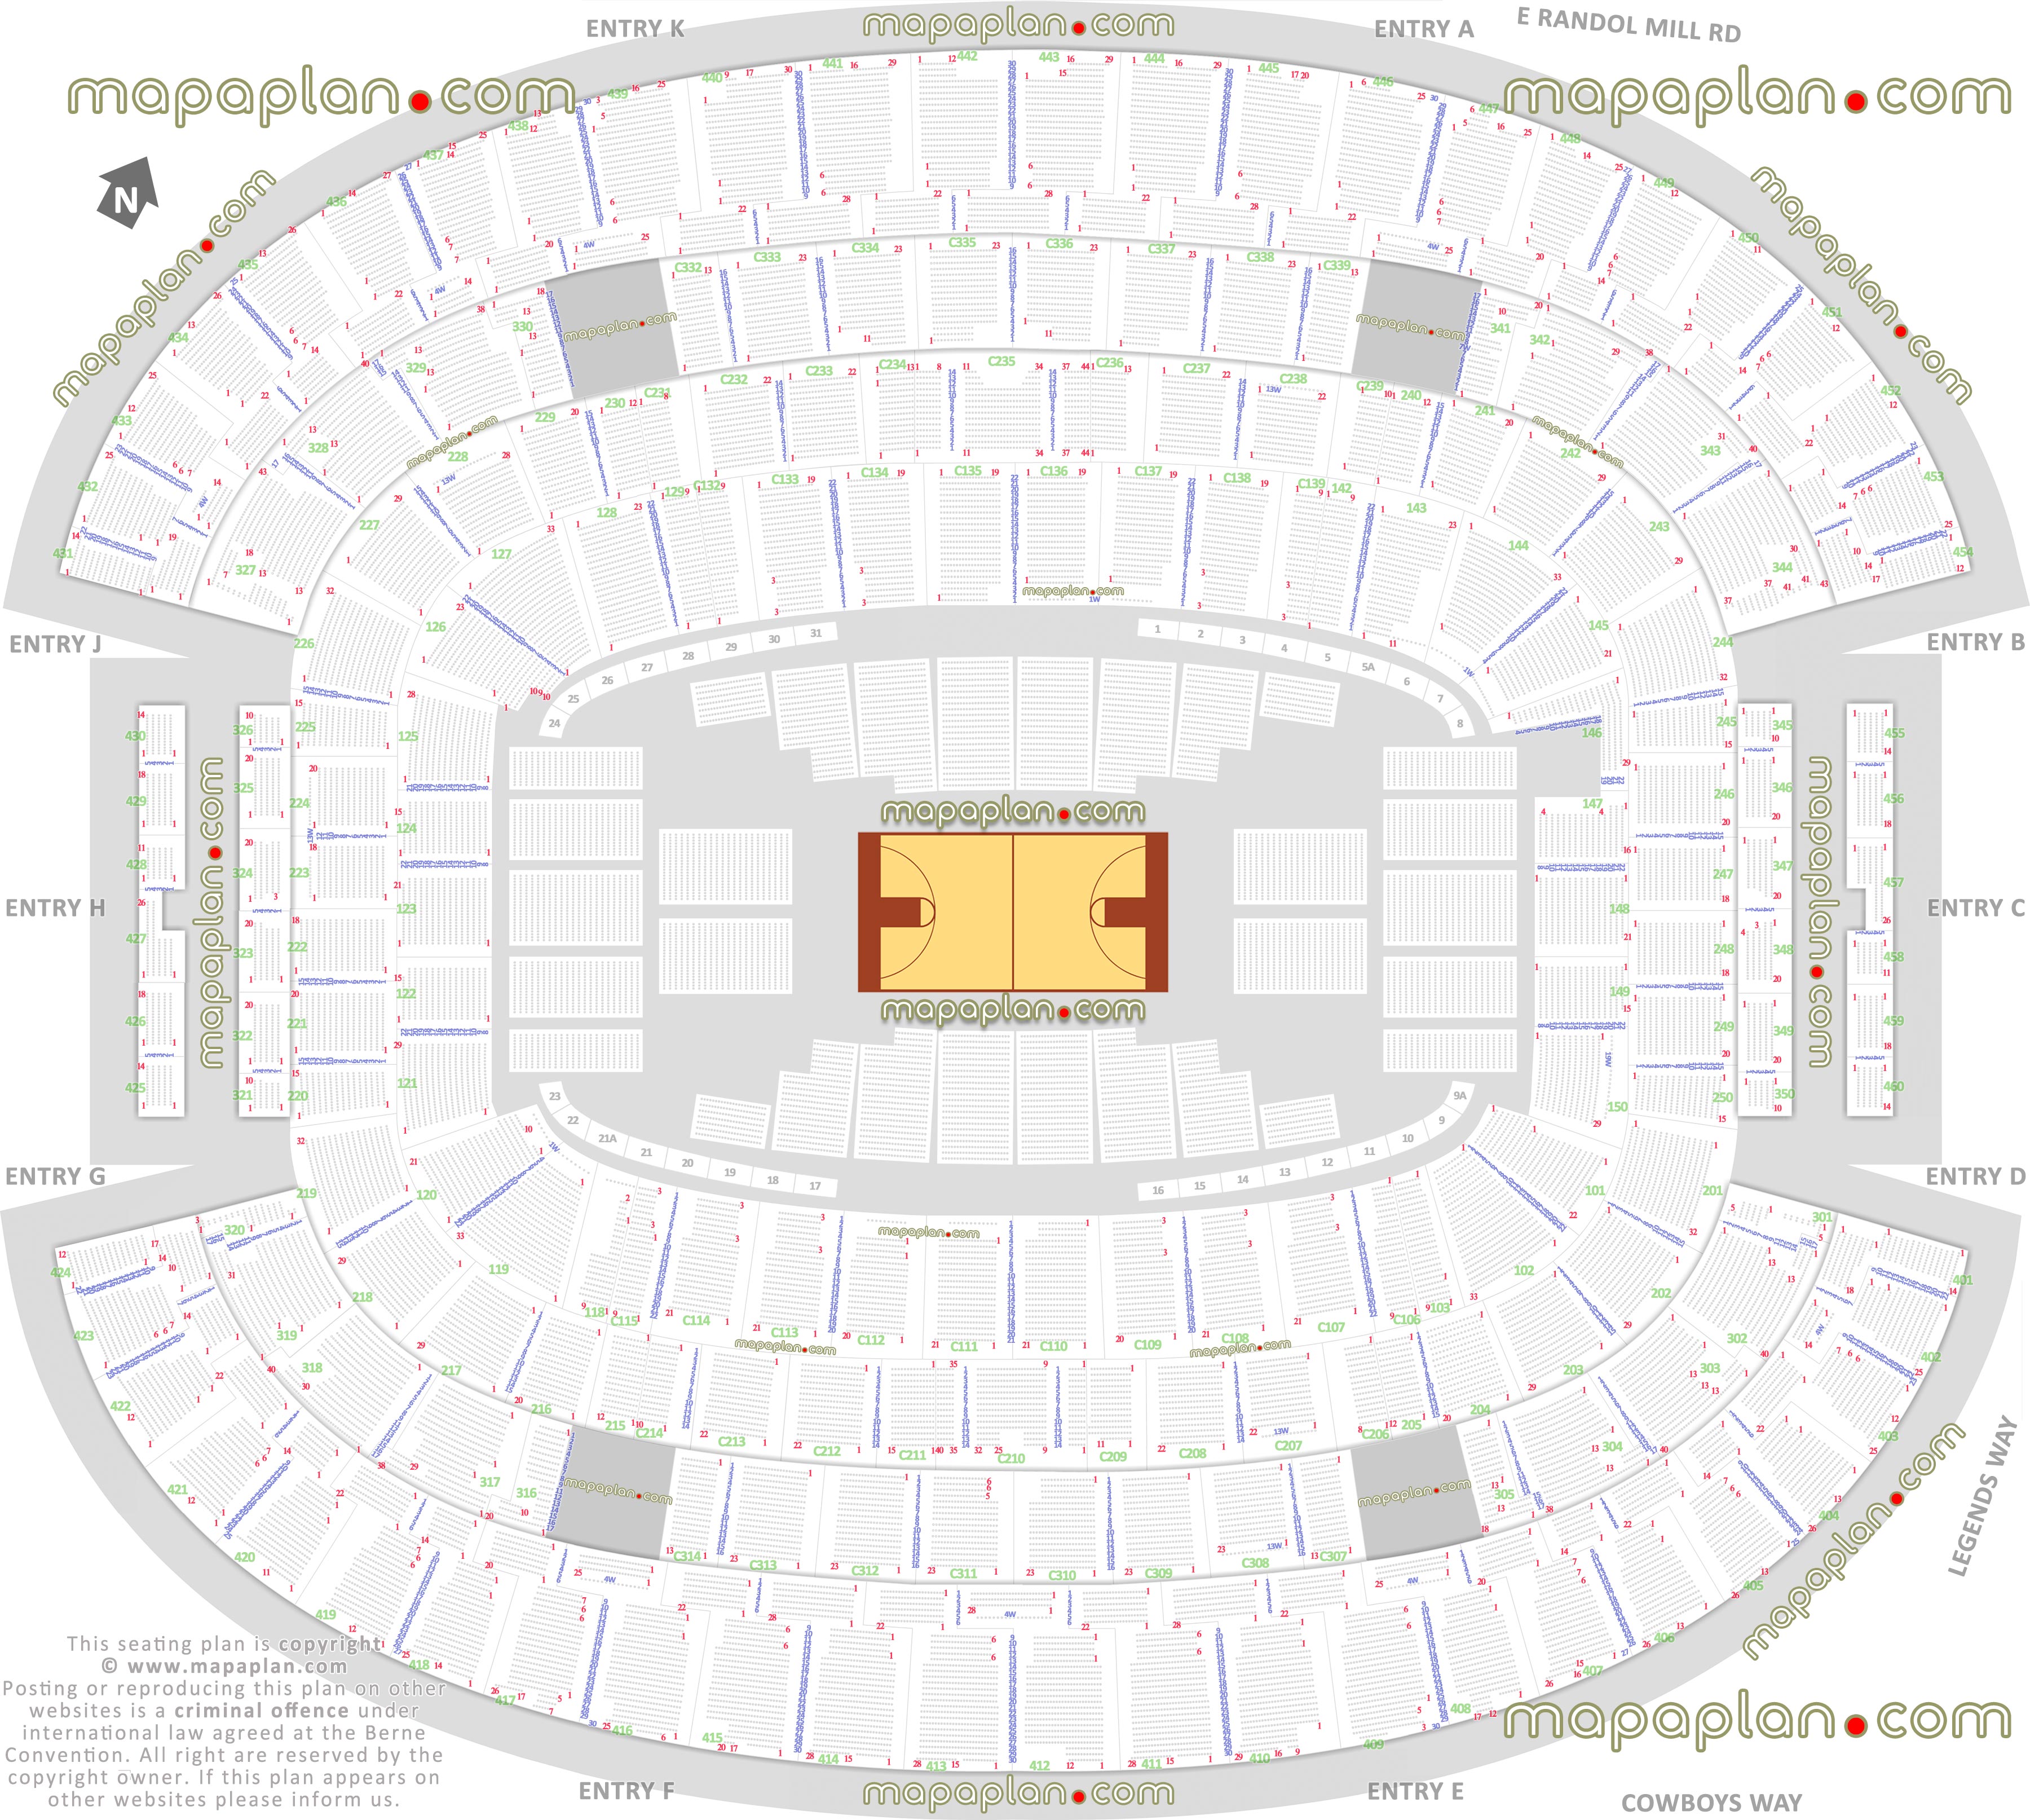 basketball ncaa tournament seating chart row max seat capacity numbers rows each section texas arlington new stadium detailed floor plan hall fame main upper concourse levels club party suites mezzanine sections 301 302 303 304 305 306 307 308 309 310 311 312 313 314 315 316 317 318 319 320 321 322 323 324 325 326 327 328 329 330 333 334 335 336 341 342 343 Dallas Cowboys ATT Stadium seating chart